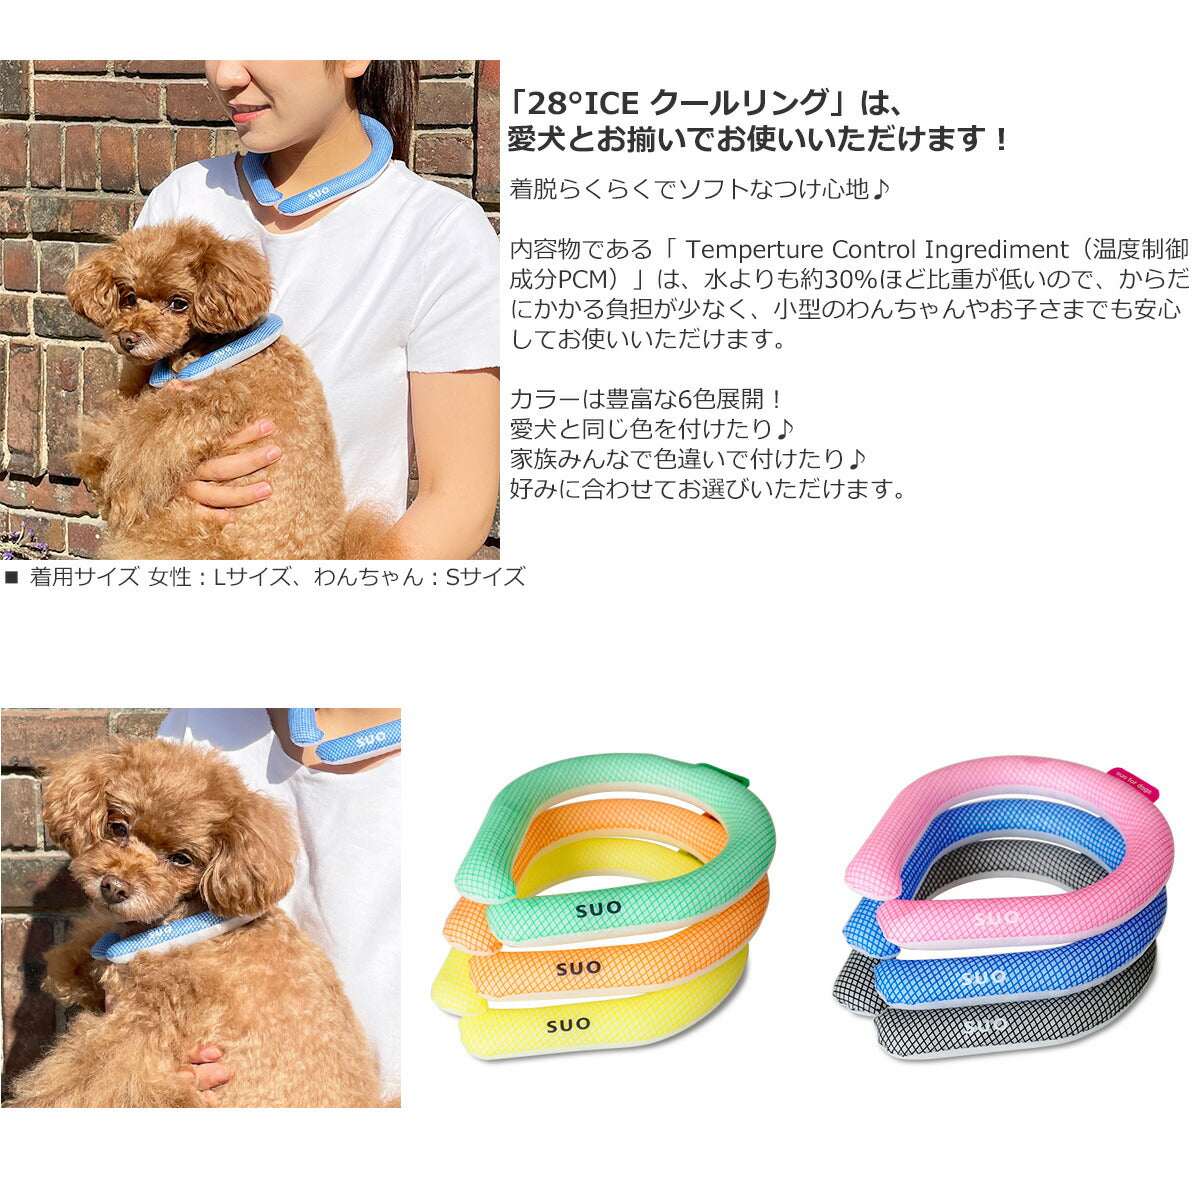 SUO for dogs 28°ICE SUOリング ボタンなし XS ピンク 熱中症対策グッズ 暑さ対策 ひんやり 首 冷感 犬 大人 子供